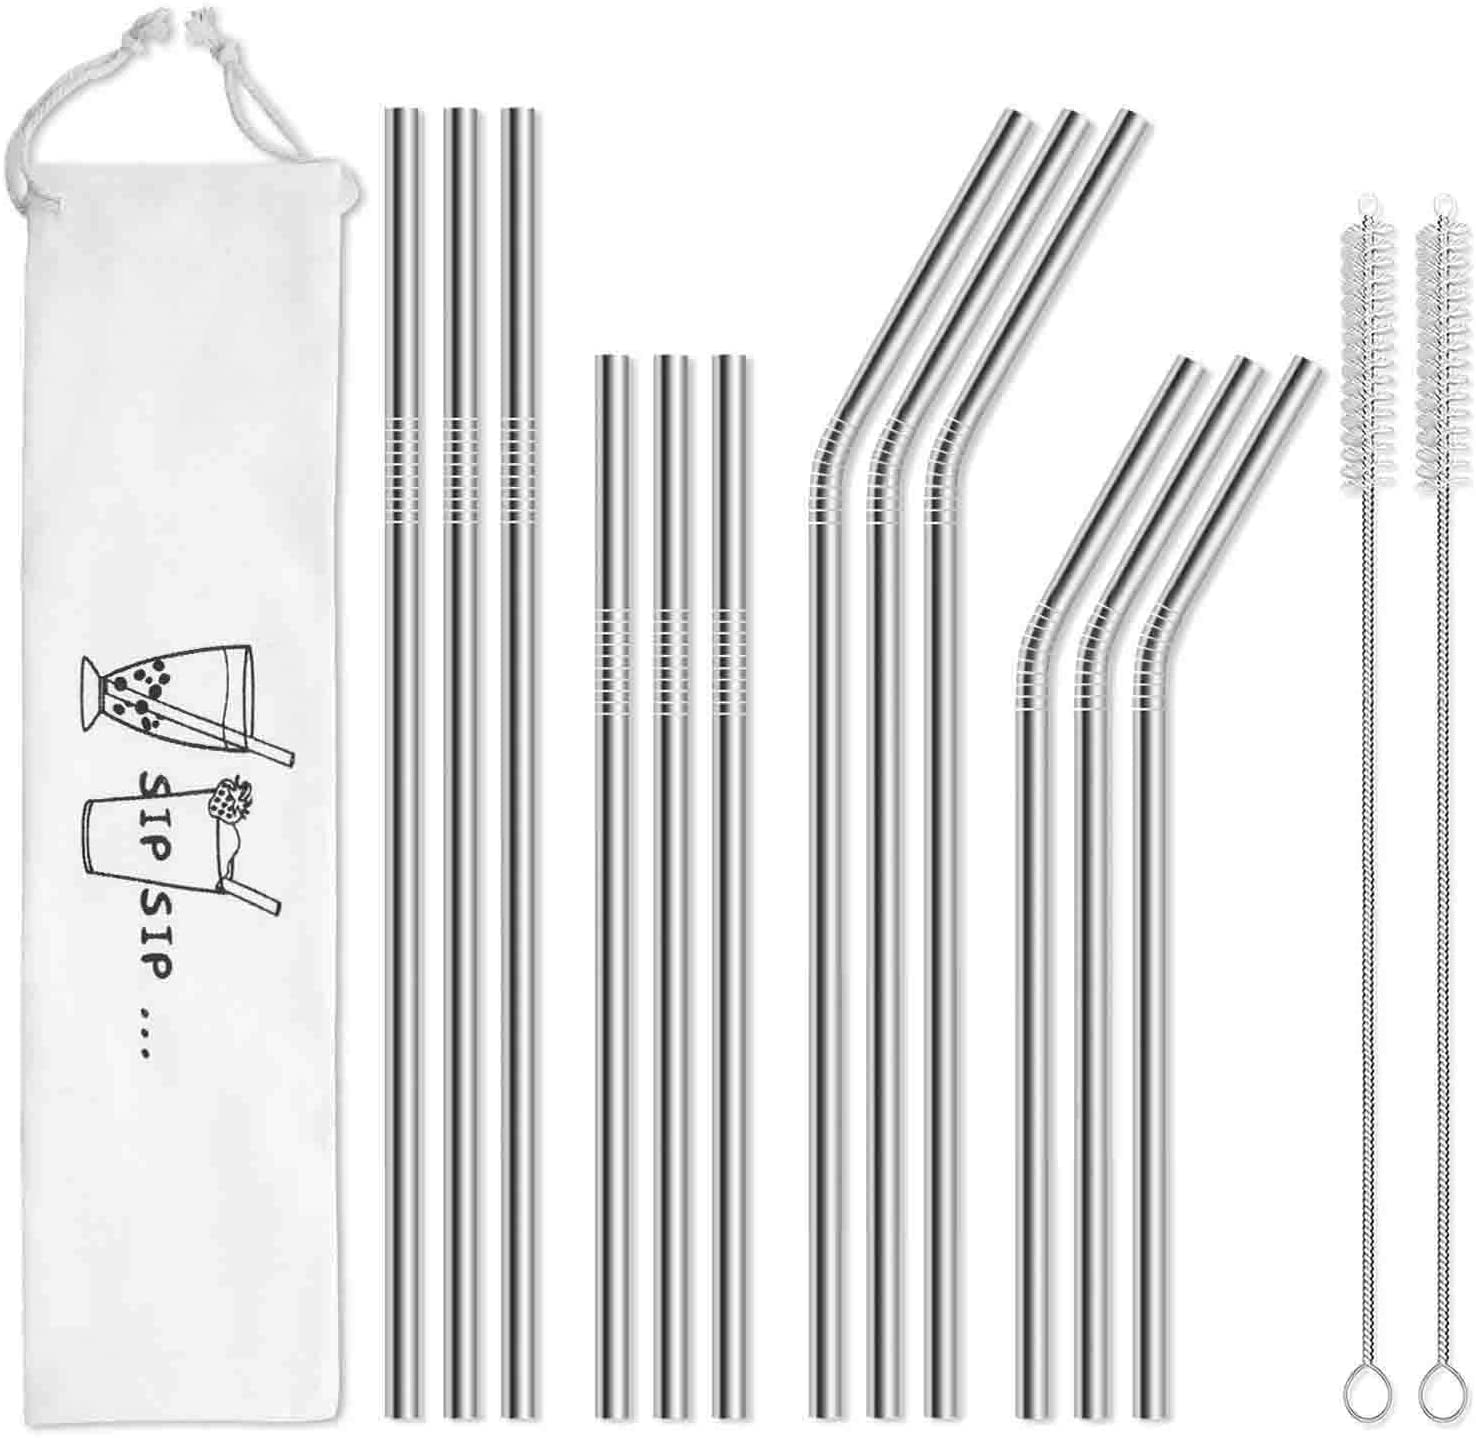 Stainless Steel Reusable Metal Bent Straws Pack of 4 Straws with 1 Brush 